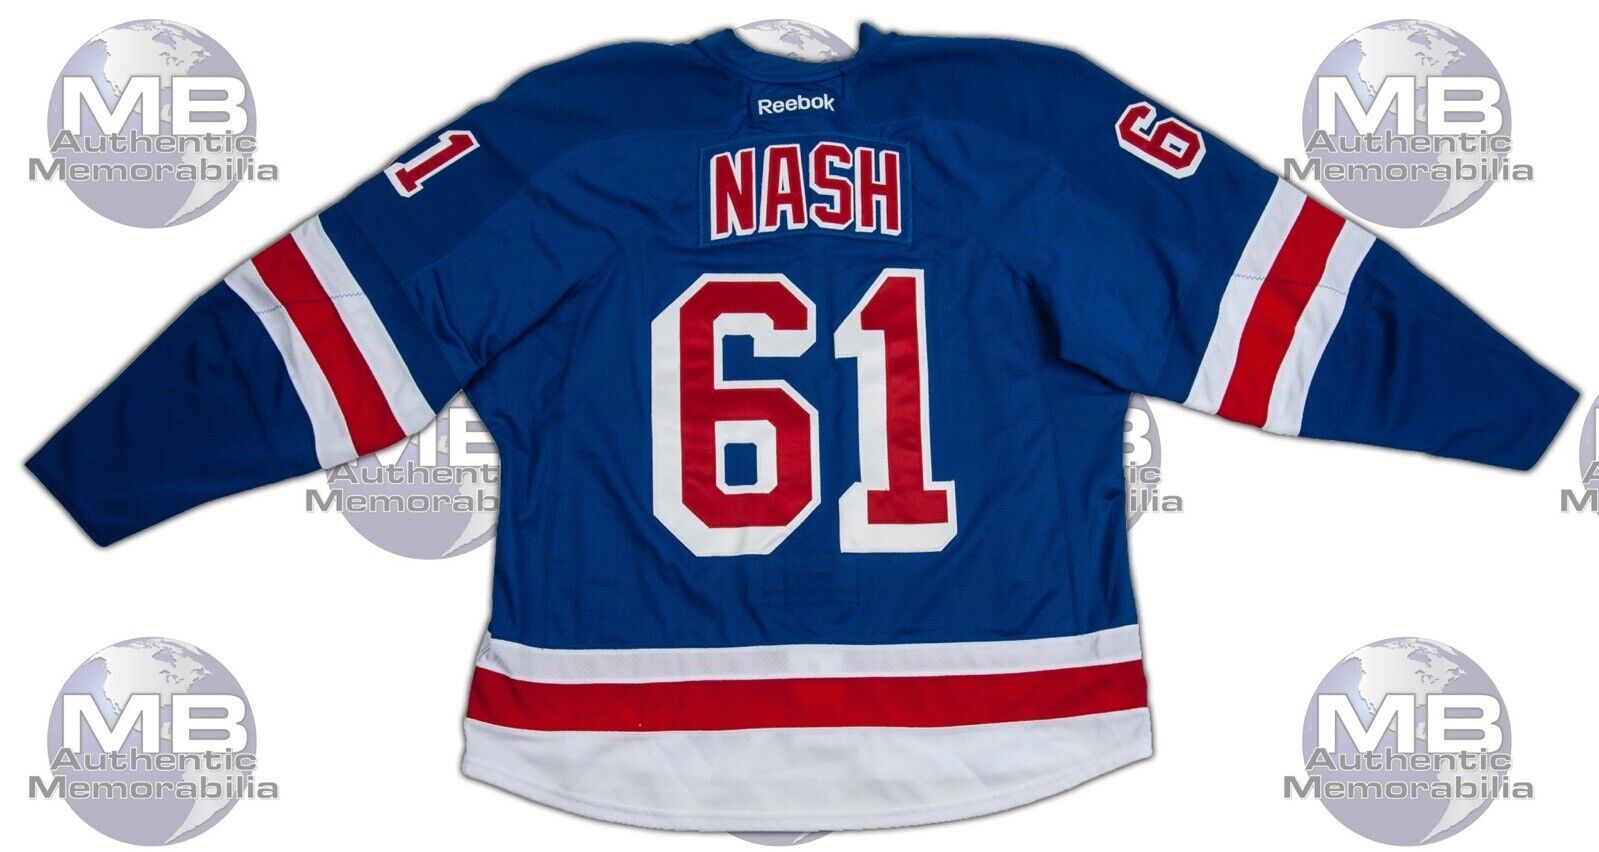 2015-2016 Rick Nash Game Used New York Rangers Home Jersey Steiner Loa (235051)